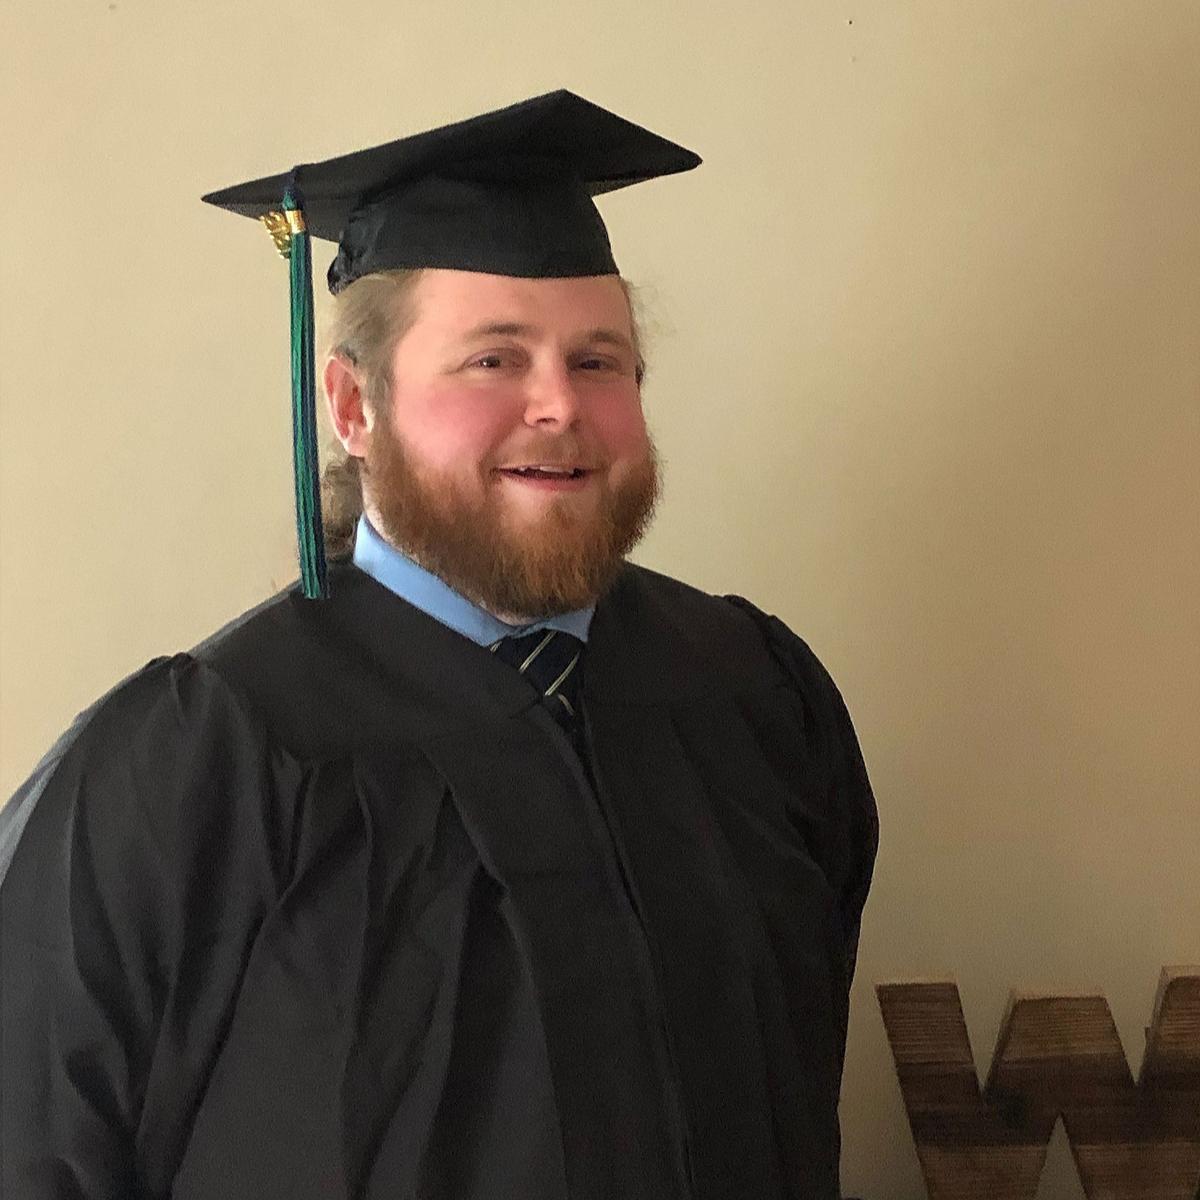 Clayton Ward graduated on June 30, 2020, with his associate's degree from MassBay Community College in the hopes of becoming a high school history teacher. (Courtesy of Clayton Ward)